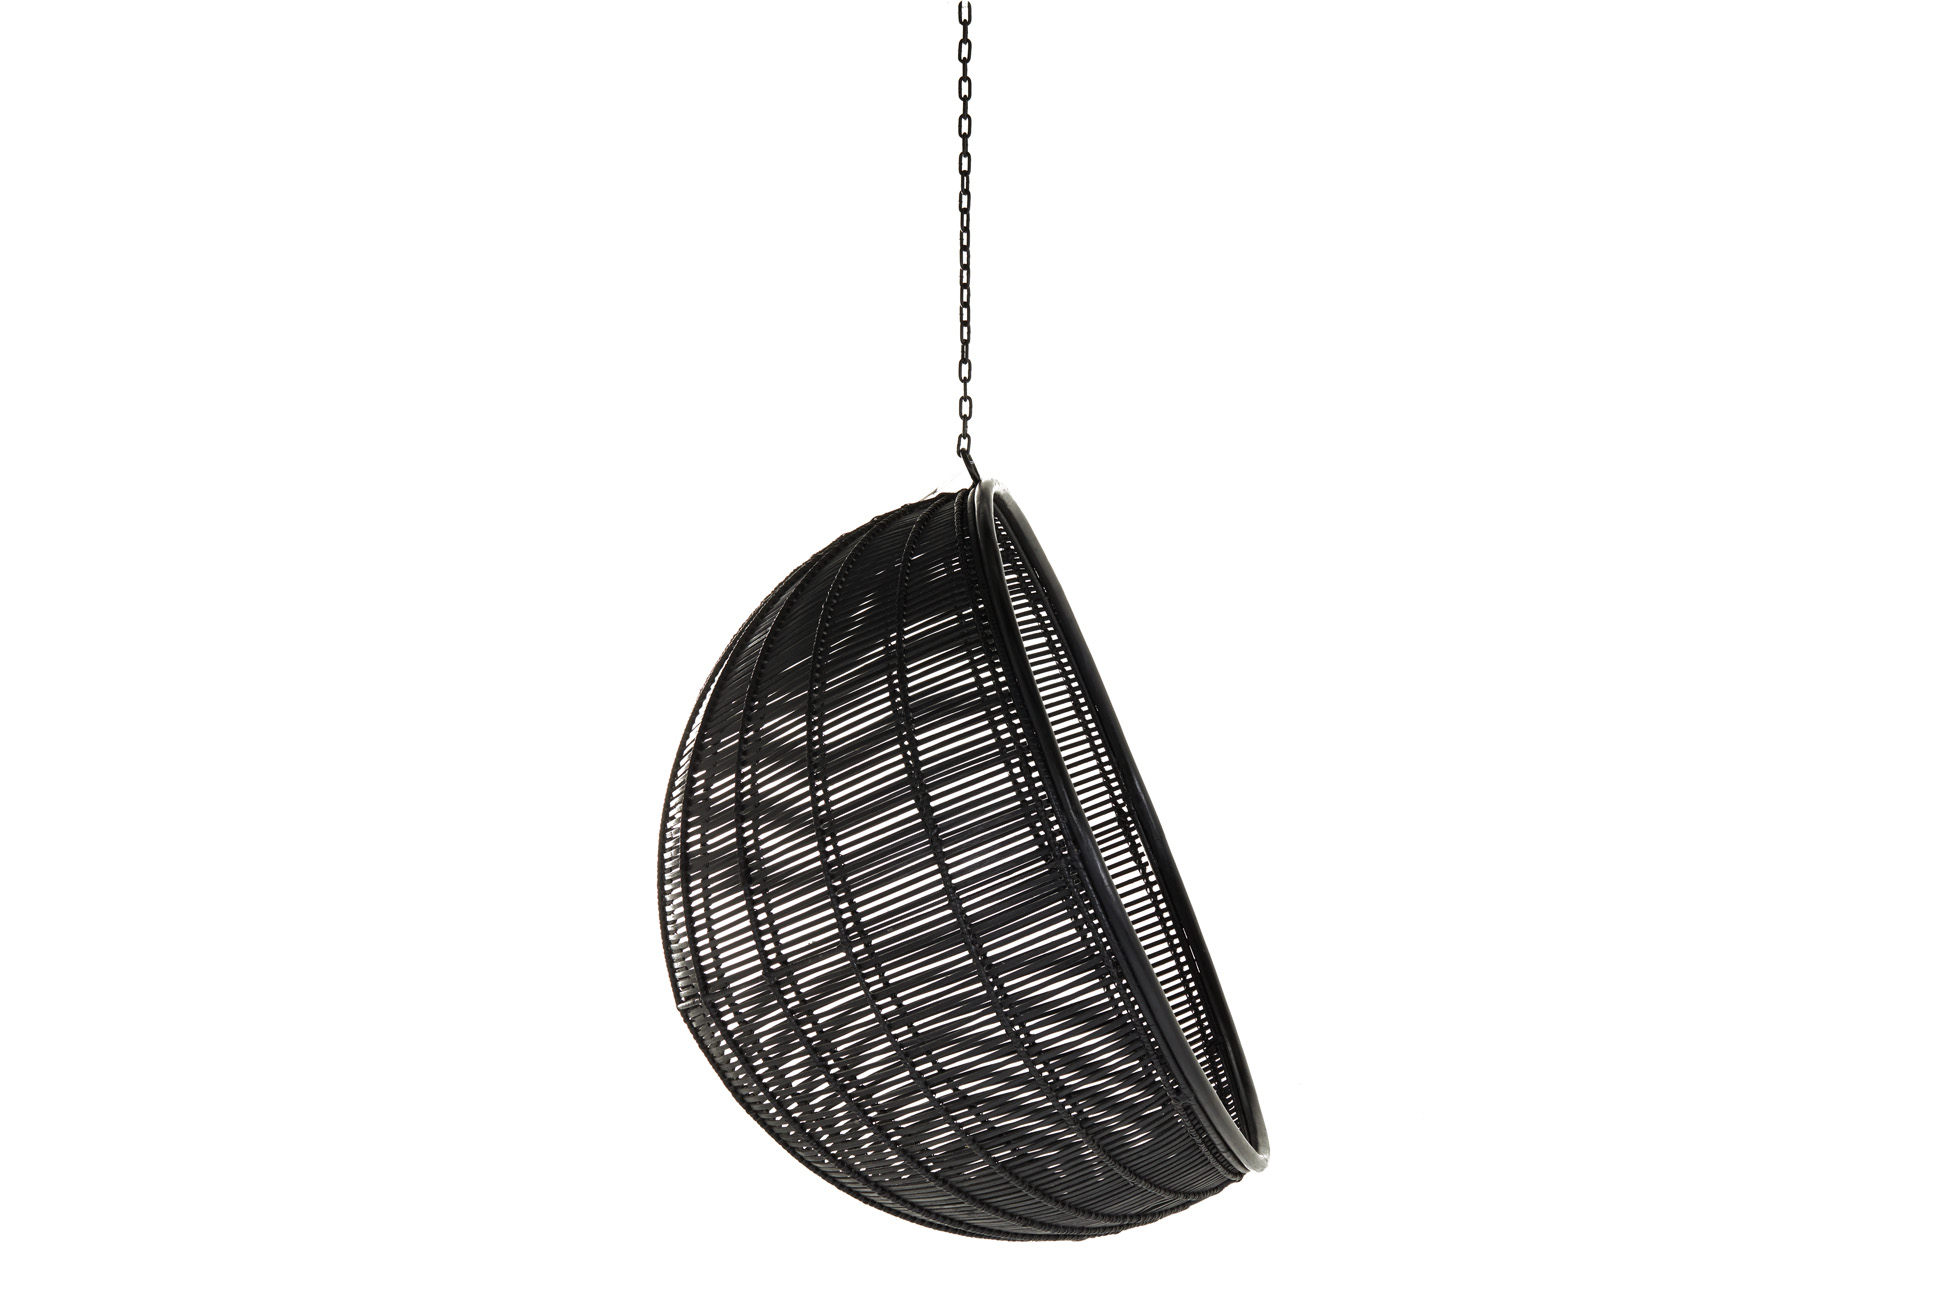 A BLACK WICKER HANGING CHAIR - Image 2 of 3